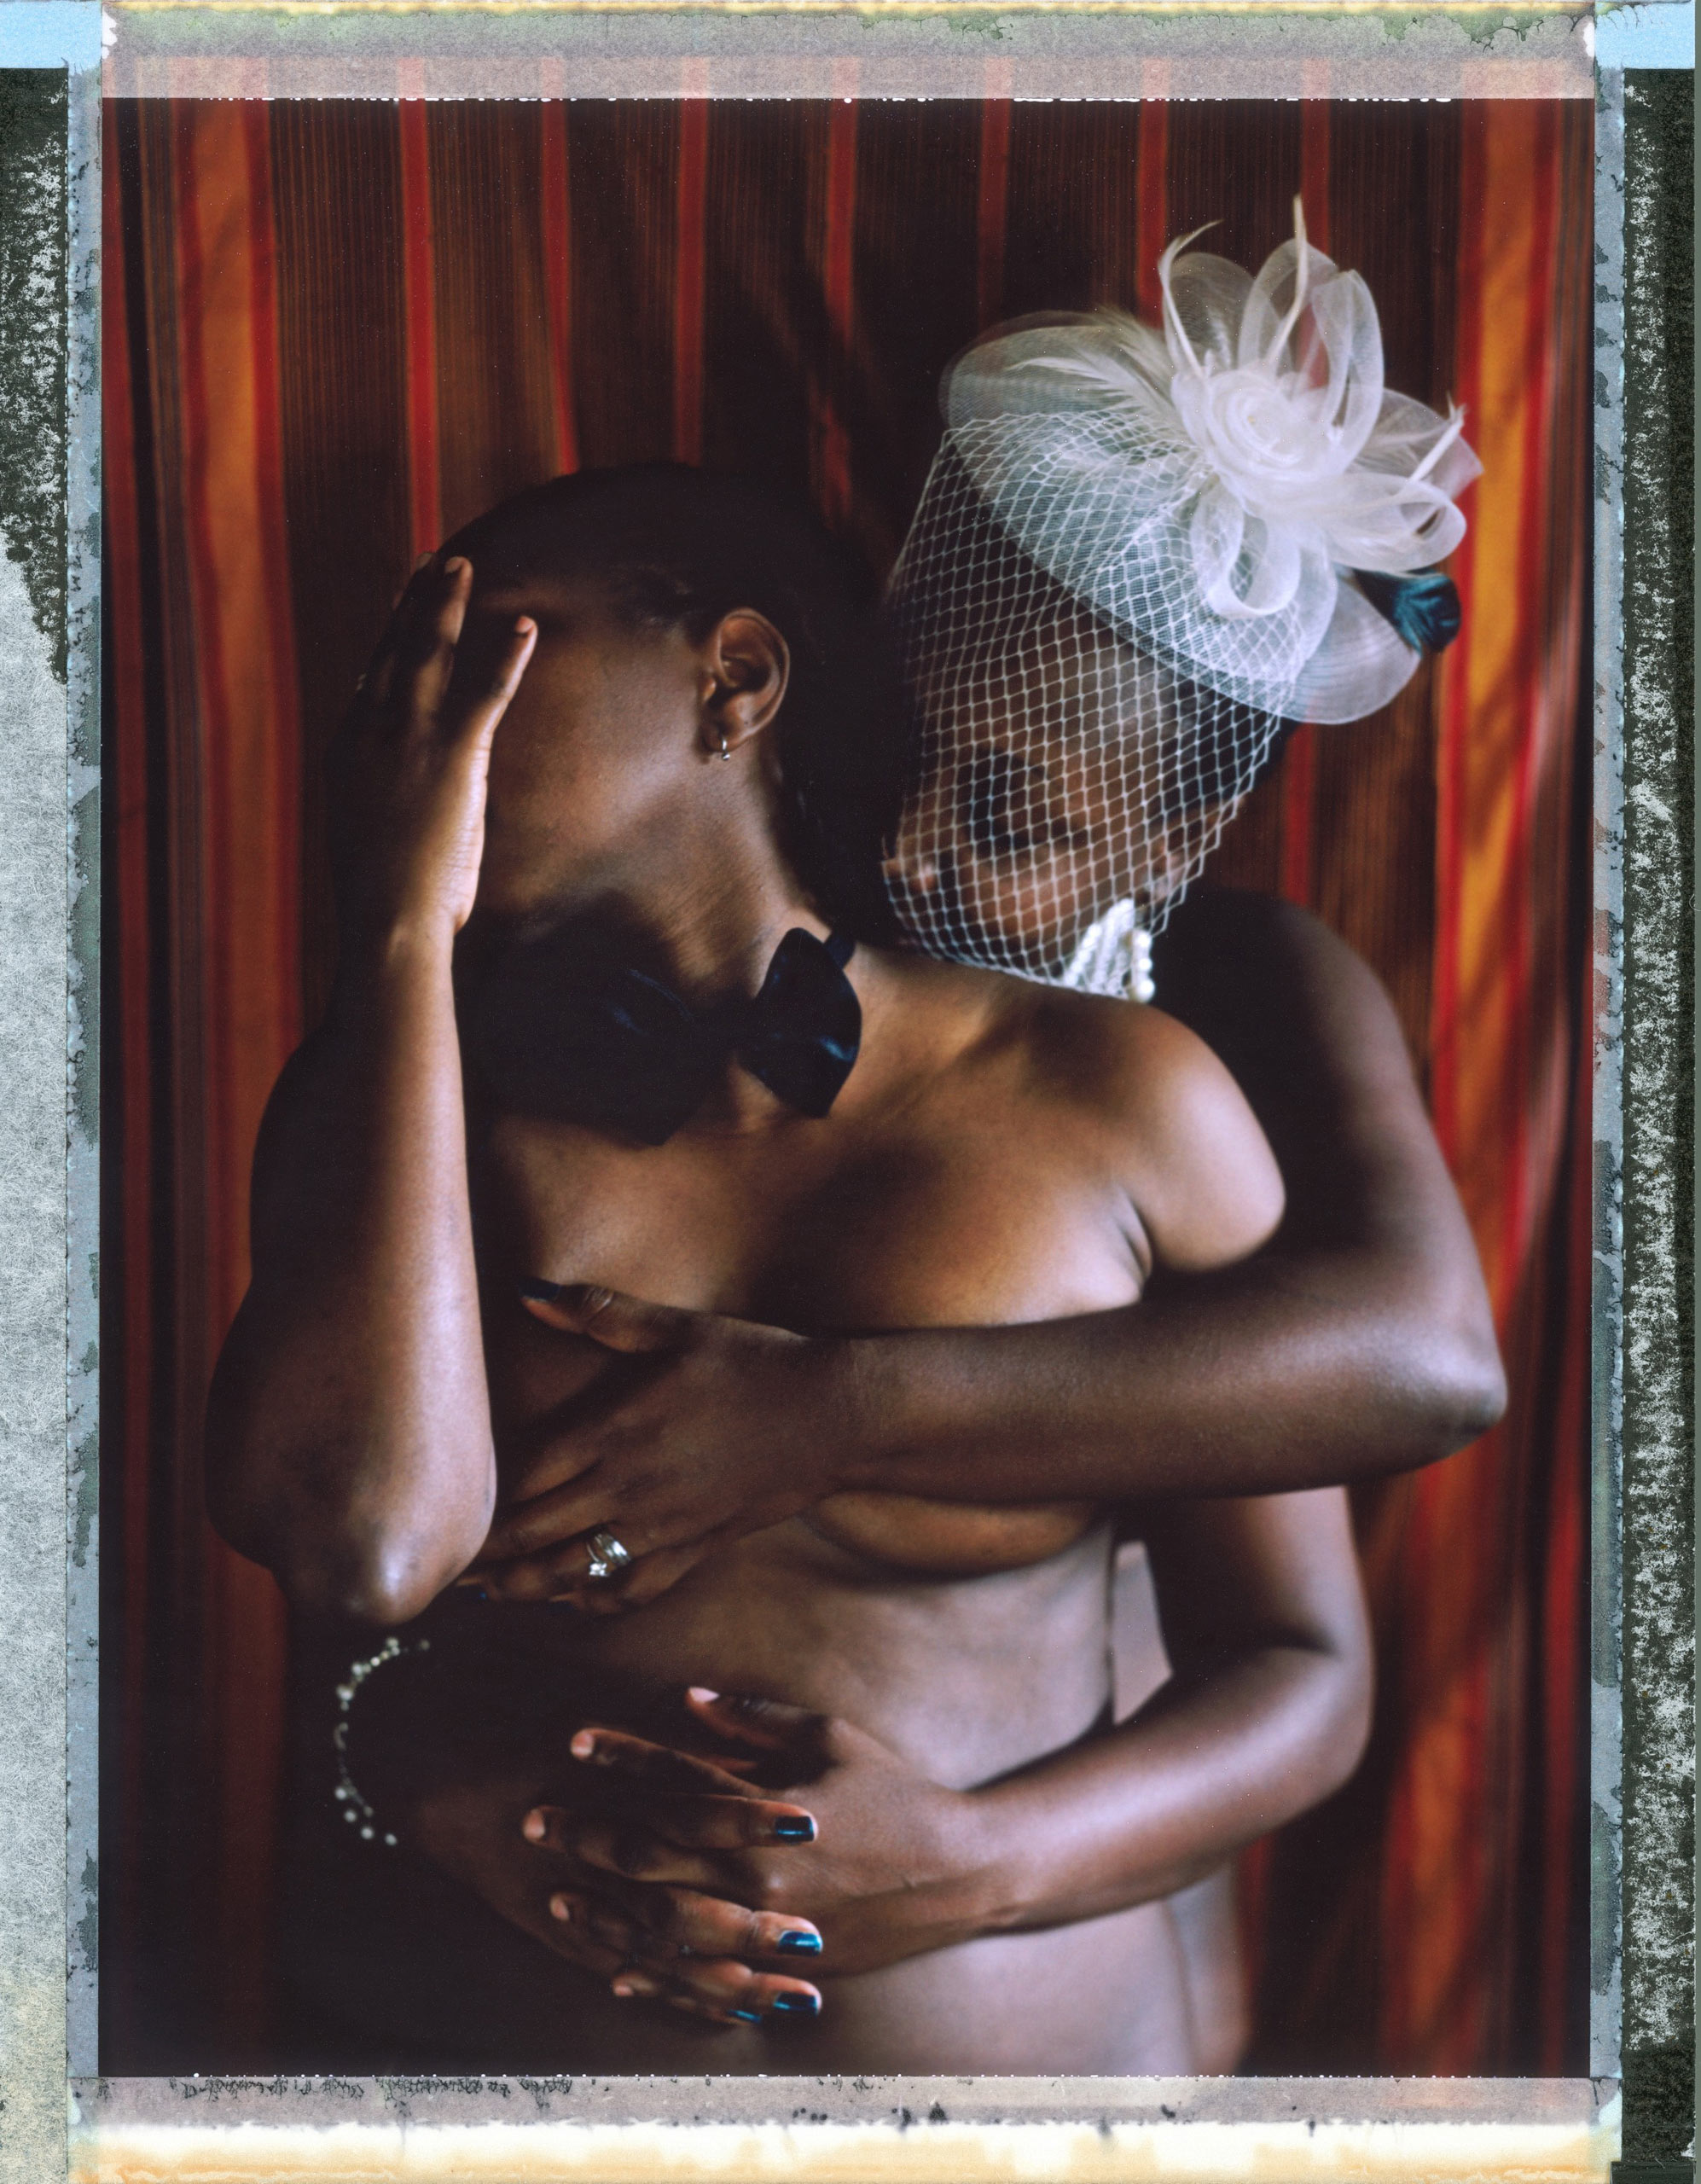 A posed posed portrait of “J” and “Q” who are too afraid to reveal their identities. They describe the circumstances they find themselves in: “(we) are a lesbian married couple though not recognized because in Uganda society lesbianism as an abnormality, an outcast, a disease that needs to be cured… We have been attacked verbally by people (men) who have noticed we are a couple… “you need to be raped to rid of your stupidity of liking a fellow girl.”… We can’t publically we are married especially since the bill had been passed and thus caused more awareness and polluted very many Ugandans minds against the LGBTIQ community which has also made living in Uganda as a lesbian a dangerous thing.” Uganda, September 2014.  While many countries around the world are legally recognizing same-sex relationships, individuals in nearly 80 countries face criminal sanctions for private consensual relations with another adult of the same sex. Violence and discrimination based on sexual orientation or gender expression is even more widespread. Africa is becoming the worst continent for Lesbian, Gay, Bi-sexual, Transgender, Queer, Inter-sex (LGBTQI) individuals. More than two thirds of African countries have laws criminalizing consensual same-sex acts. In some, homosexuality is punishable by death. In Nigeria new homophobic laws introduced in 2013 led to dramatic increase in attacks. Under Sharia Law, homosexuality is punishable by death, up to 50 lashes and six months in prison for woman; for men elsewhere, up to 14 years in prison. Same sex acts are illegal in Uganda. A discriminatory law was passed then struck down and homophobic attacks rose tenfold after the passage of the Anti-Homosexuality Act. In Cameroon it is also illegal. More cases against suspected homosexuals are brought here than any other African country. In stark contrast with the rest of the continent, same sex relationships are legal in South Africa. The country has the most liberal laws towa